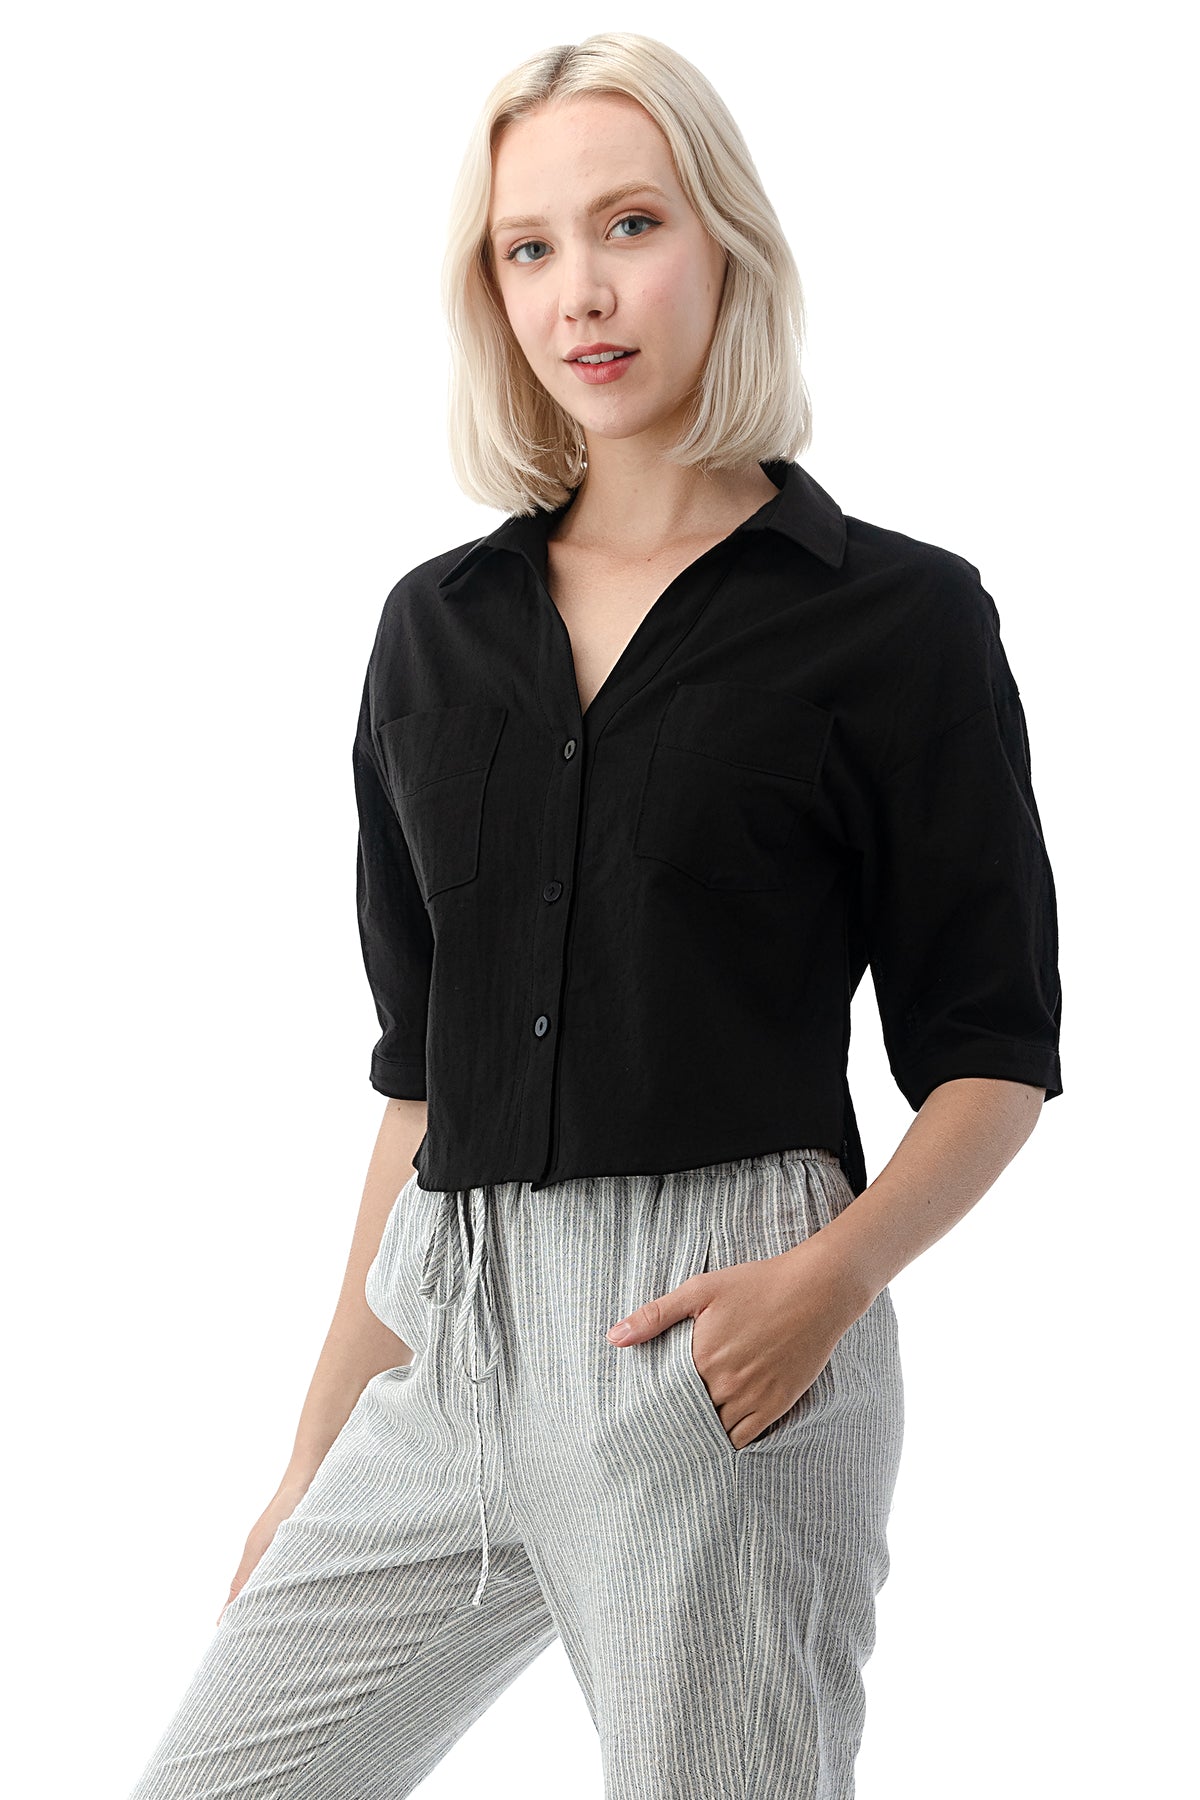 EDGY Land Girl's and Women's Collared V-Neck Side Slit Button Down 1/2 Sleeve Fashion Shirt